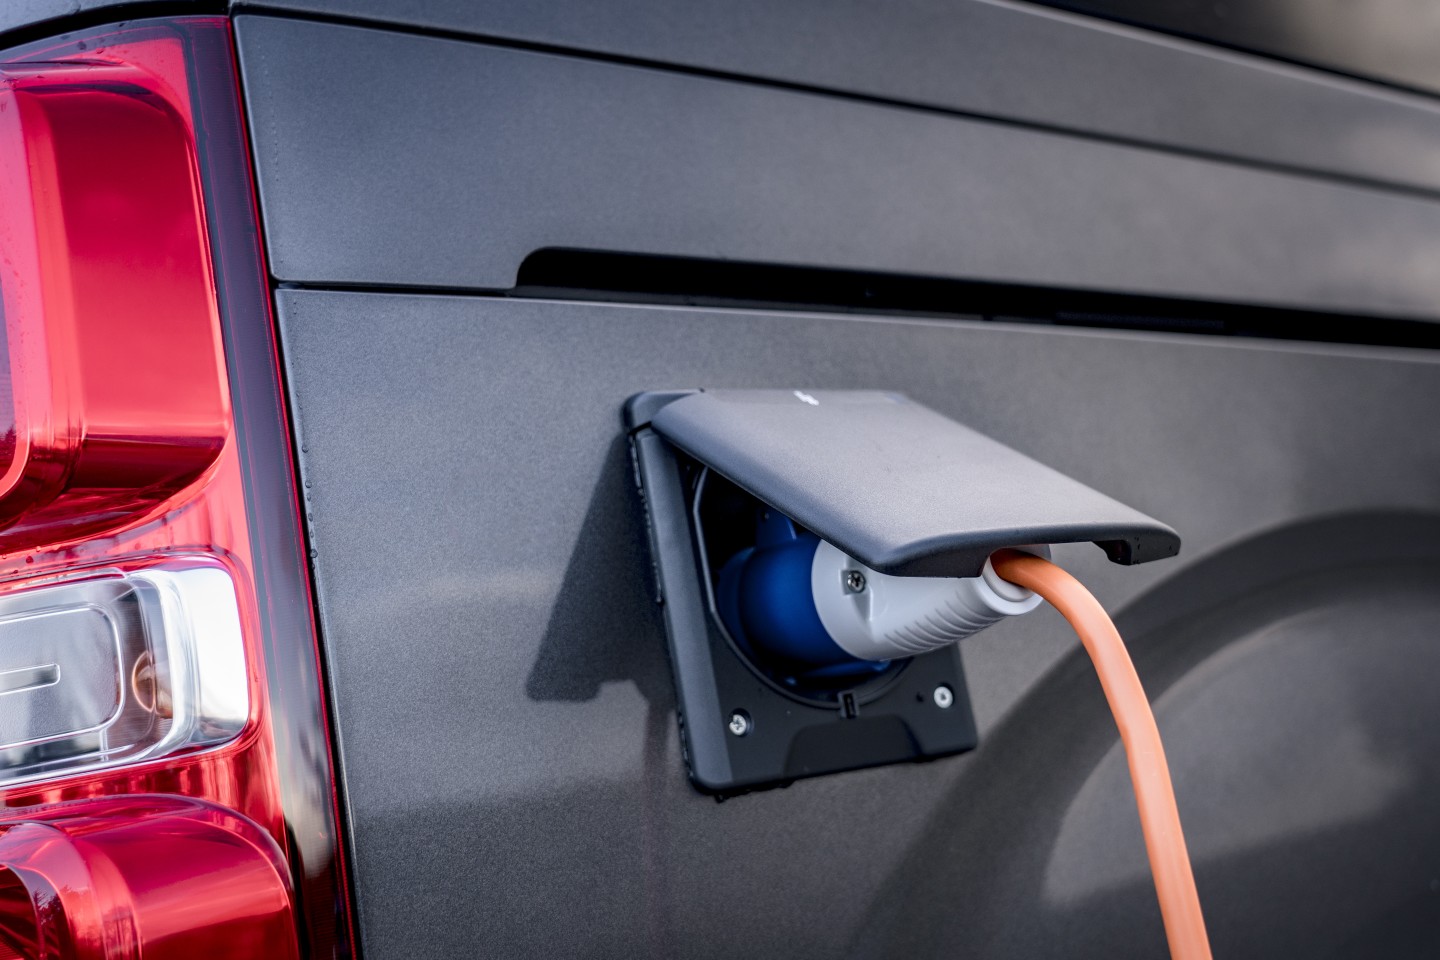 The Vivaro E that will underpin the electric offers up to 205 miles of driving range per charge and can charge to 80 percent in 45 minutes with 100-kW fast charging